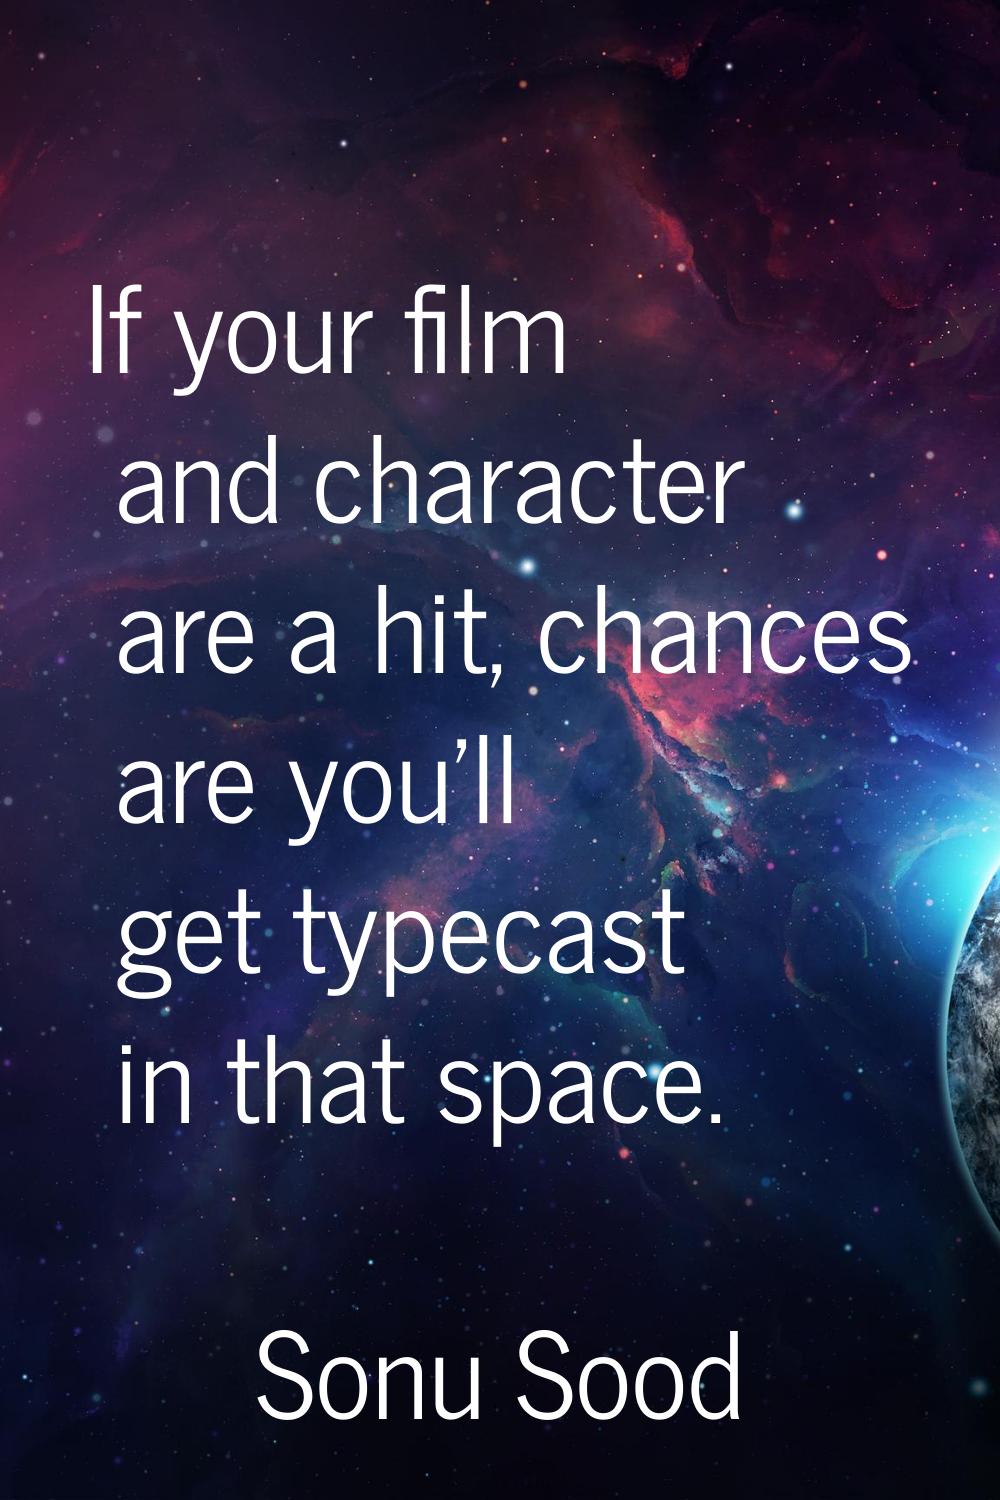 If your film and character are a hit, chances are you'll get typecast in that space.